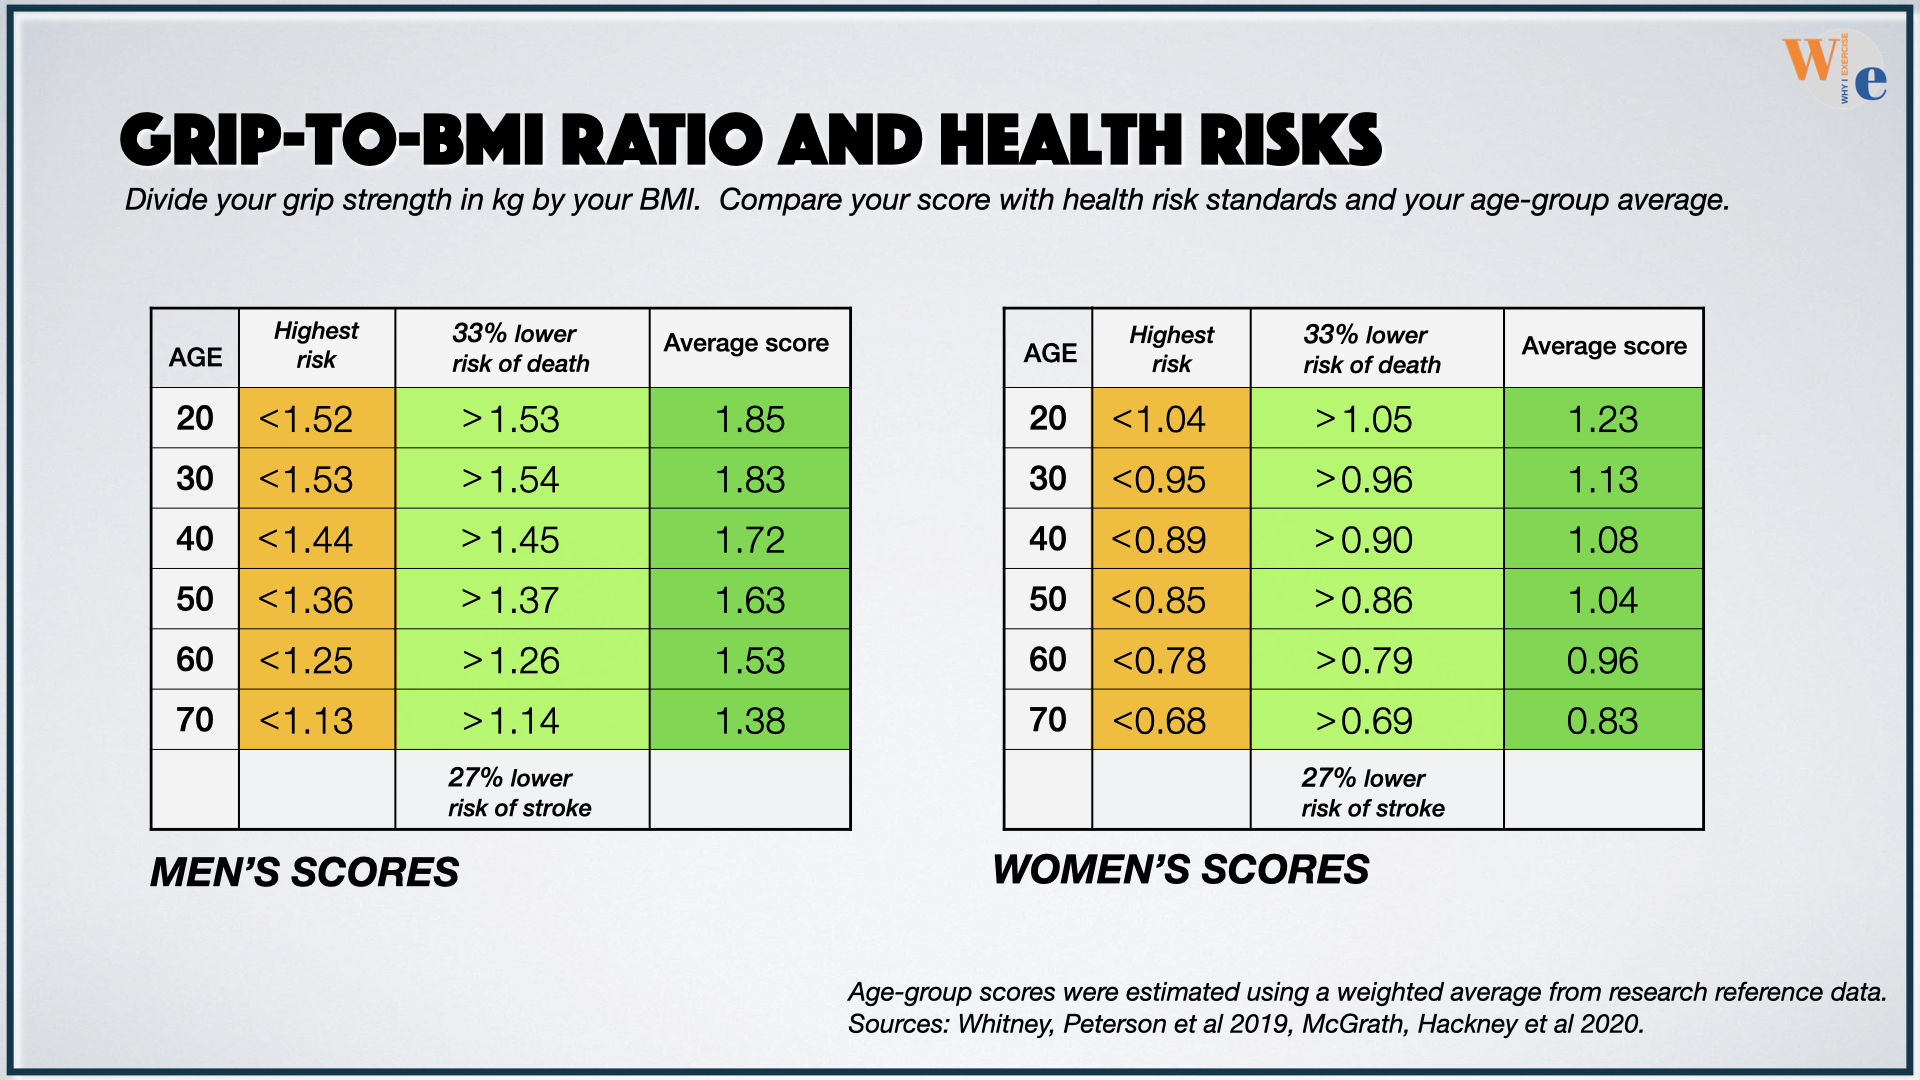 Do you have a good grip strength relative to your BMI?